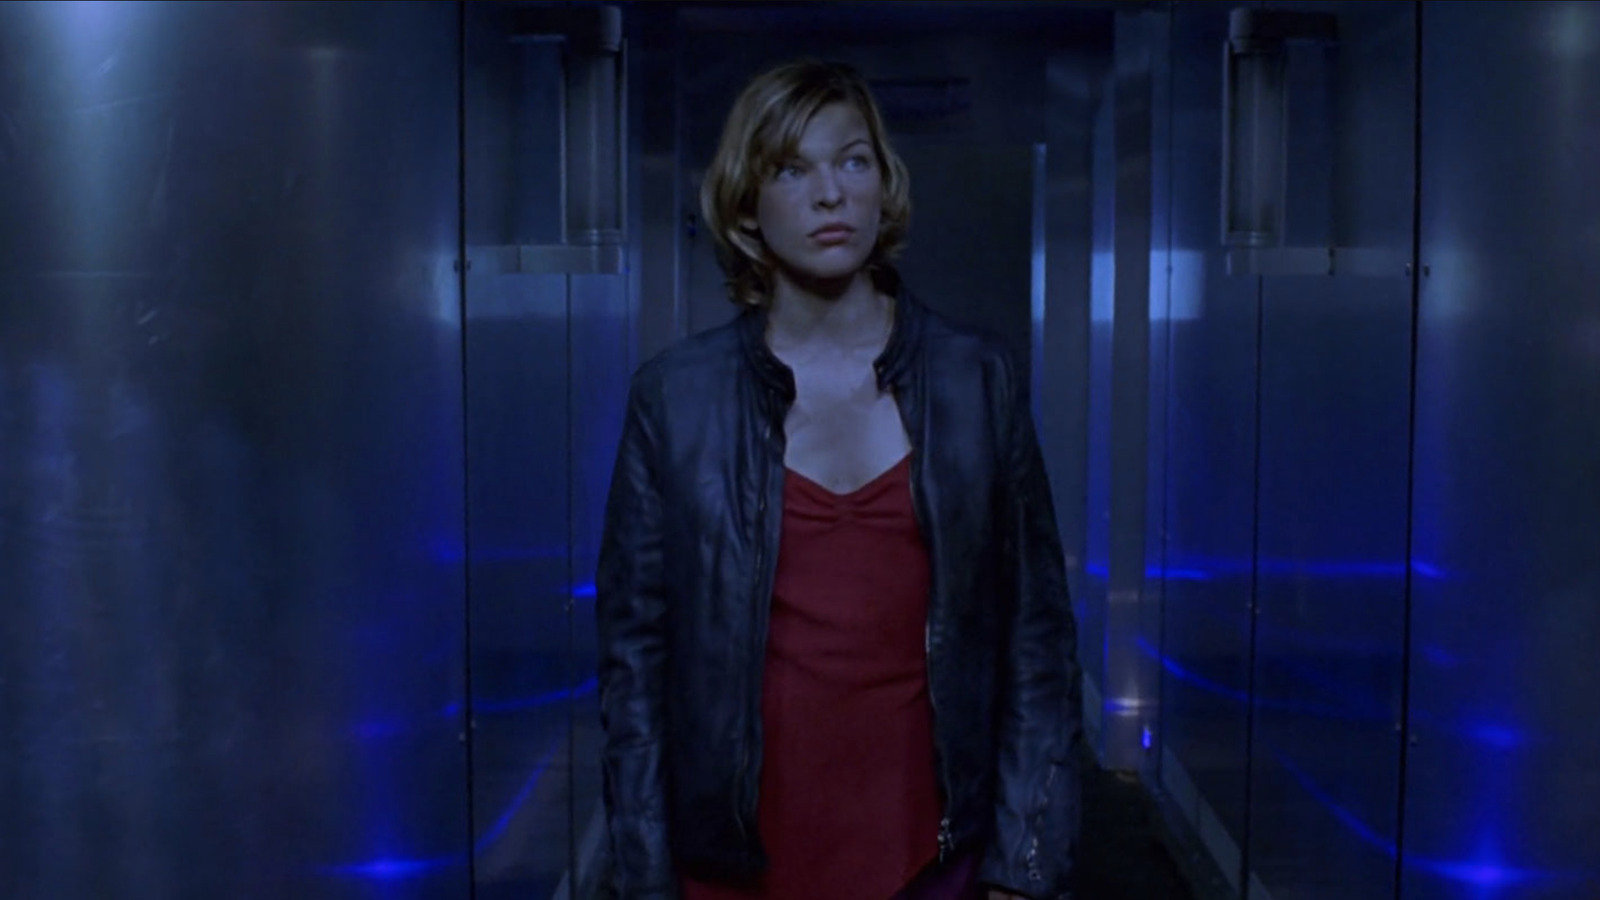 Milla Jovovich Left the 'Resident Evil' Franchise After 2 Tragic